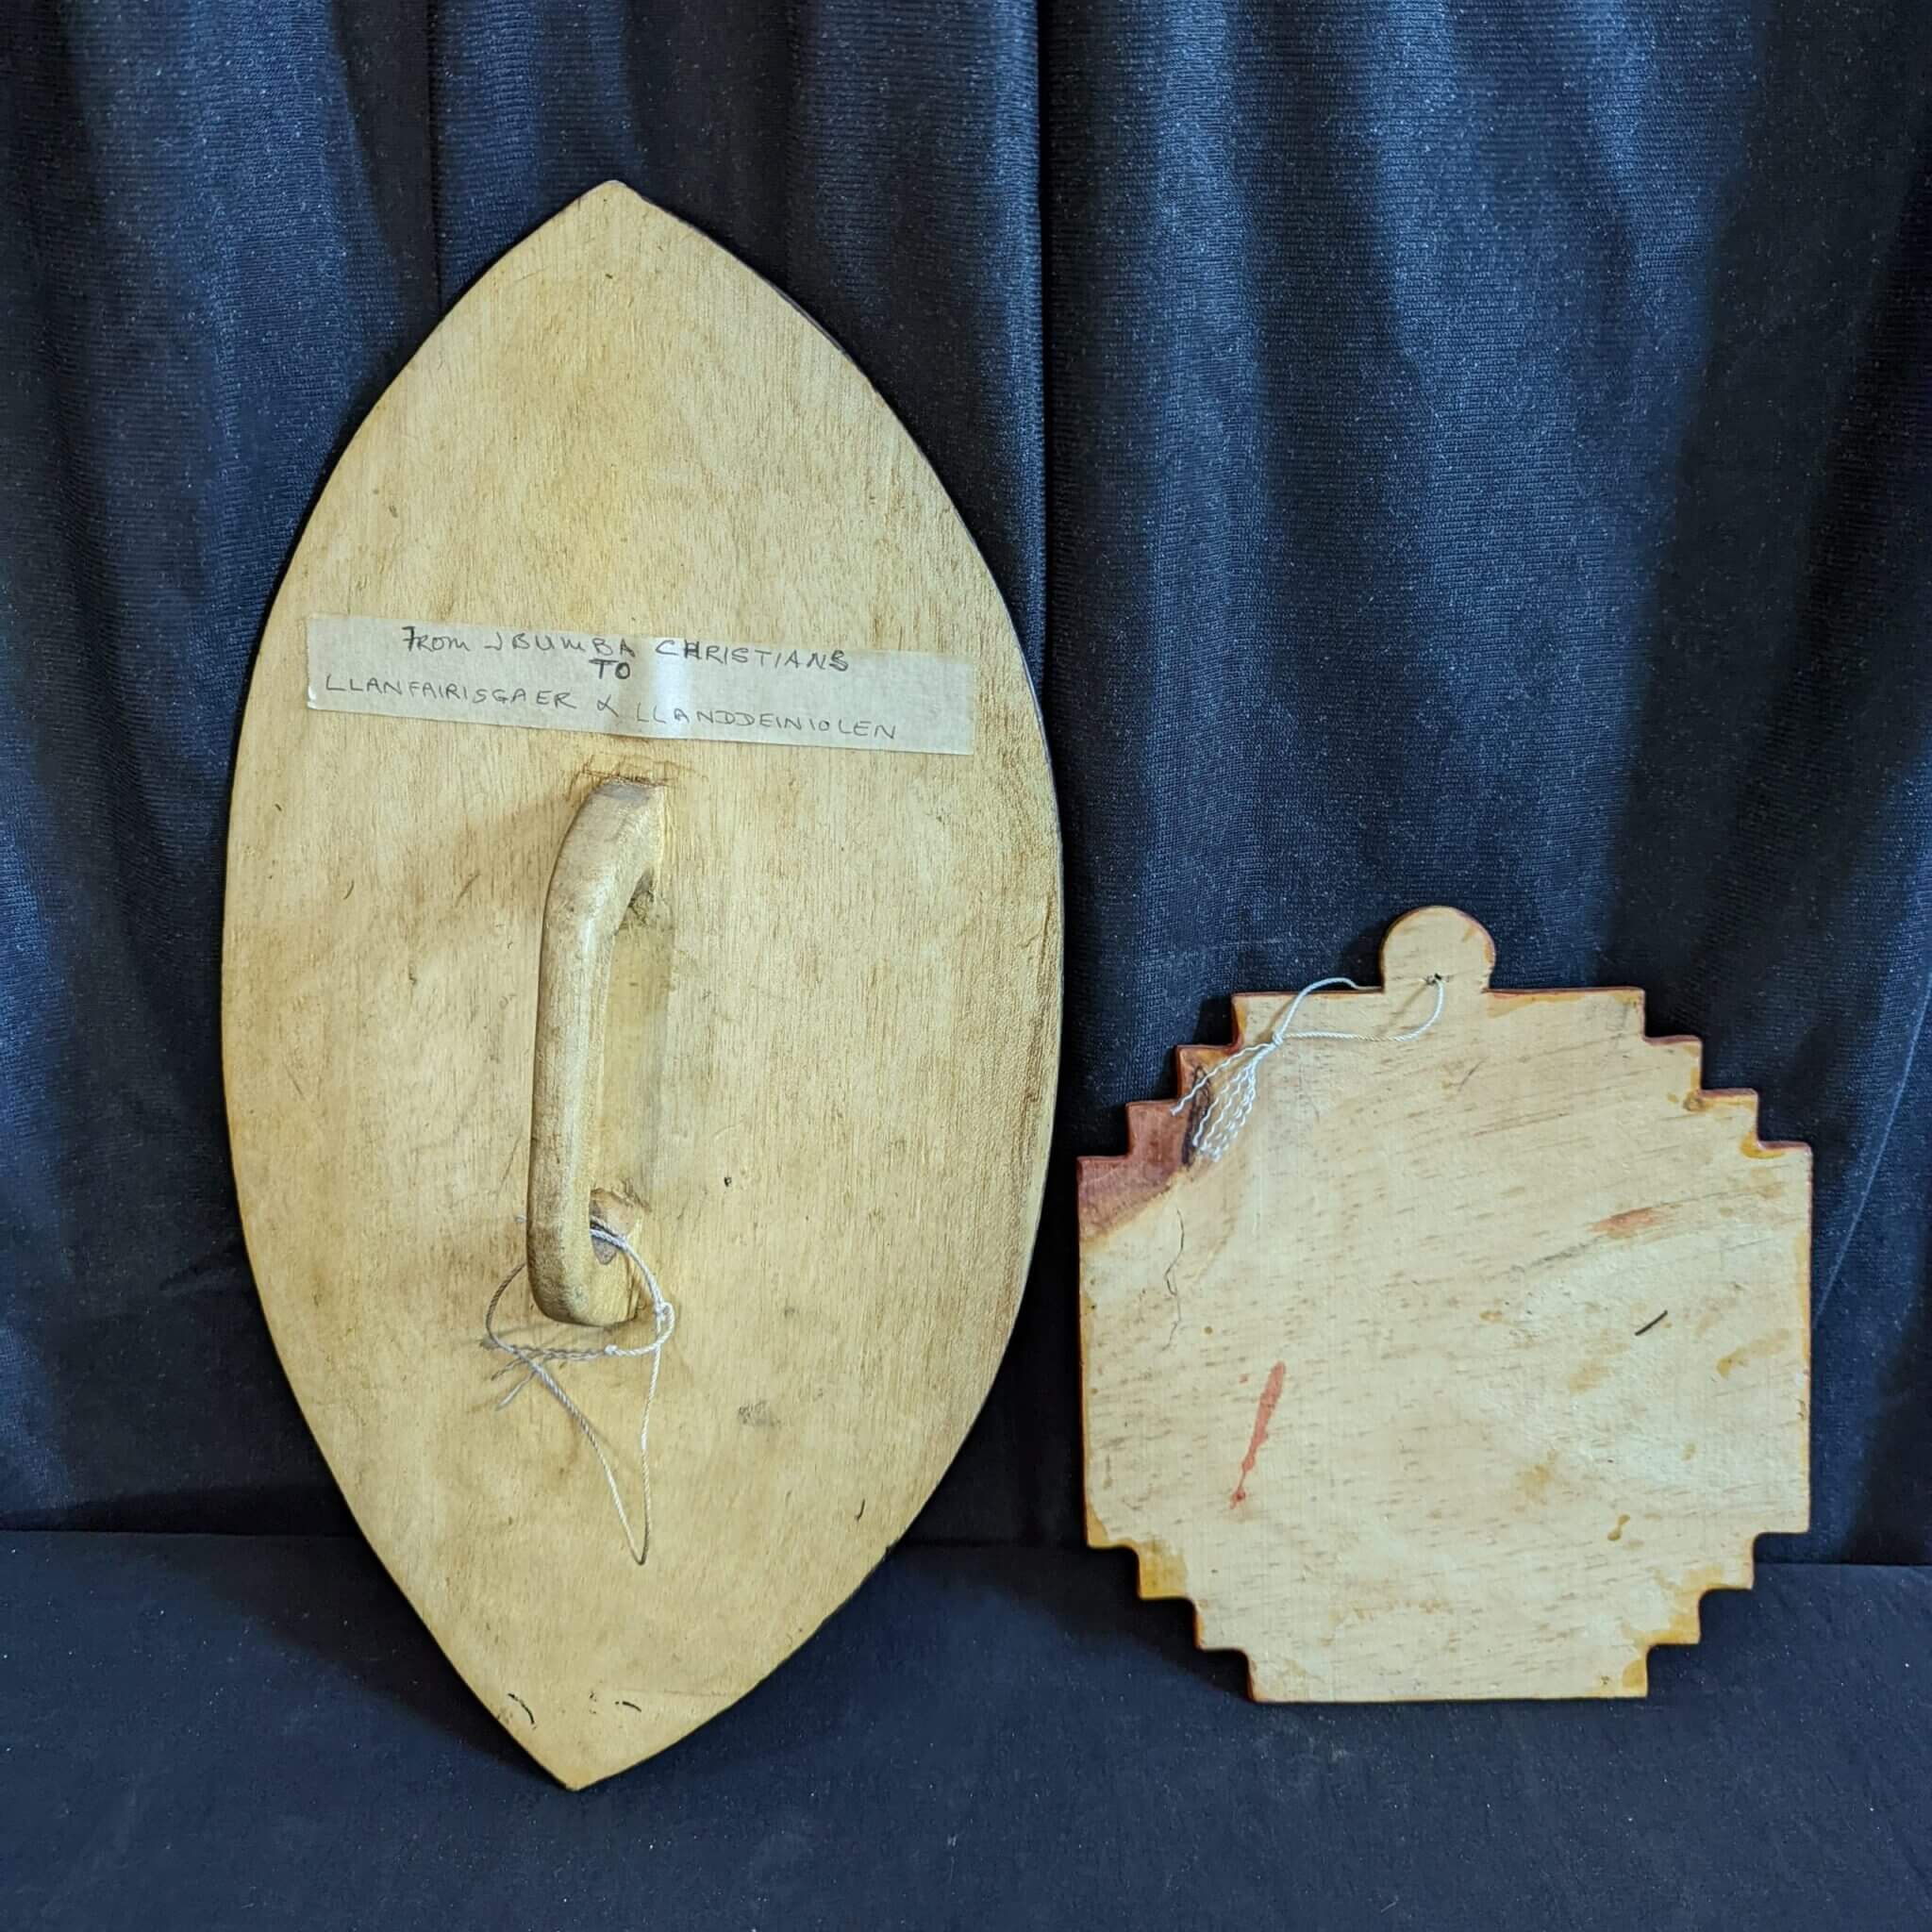 Two Items of African Christianalia Gifted to St Mary's Port Dinorwic ...